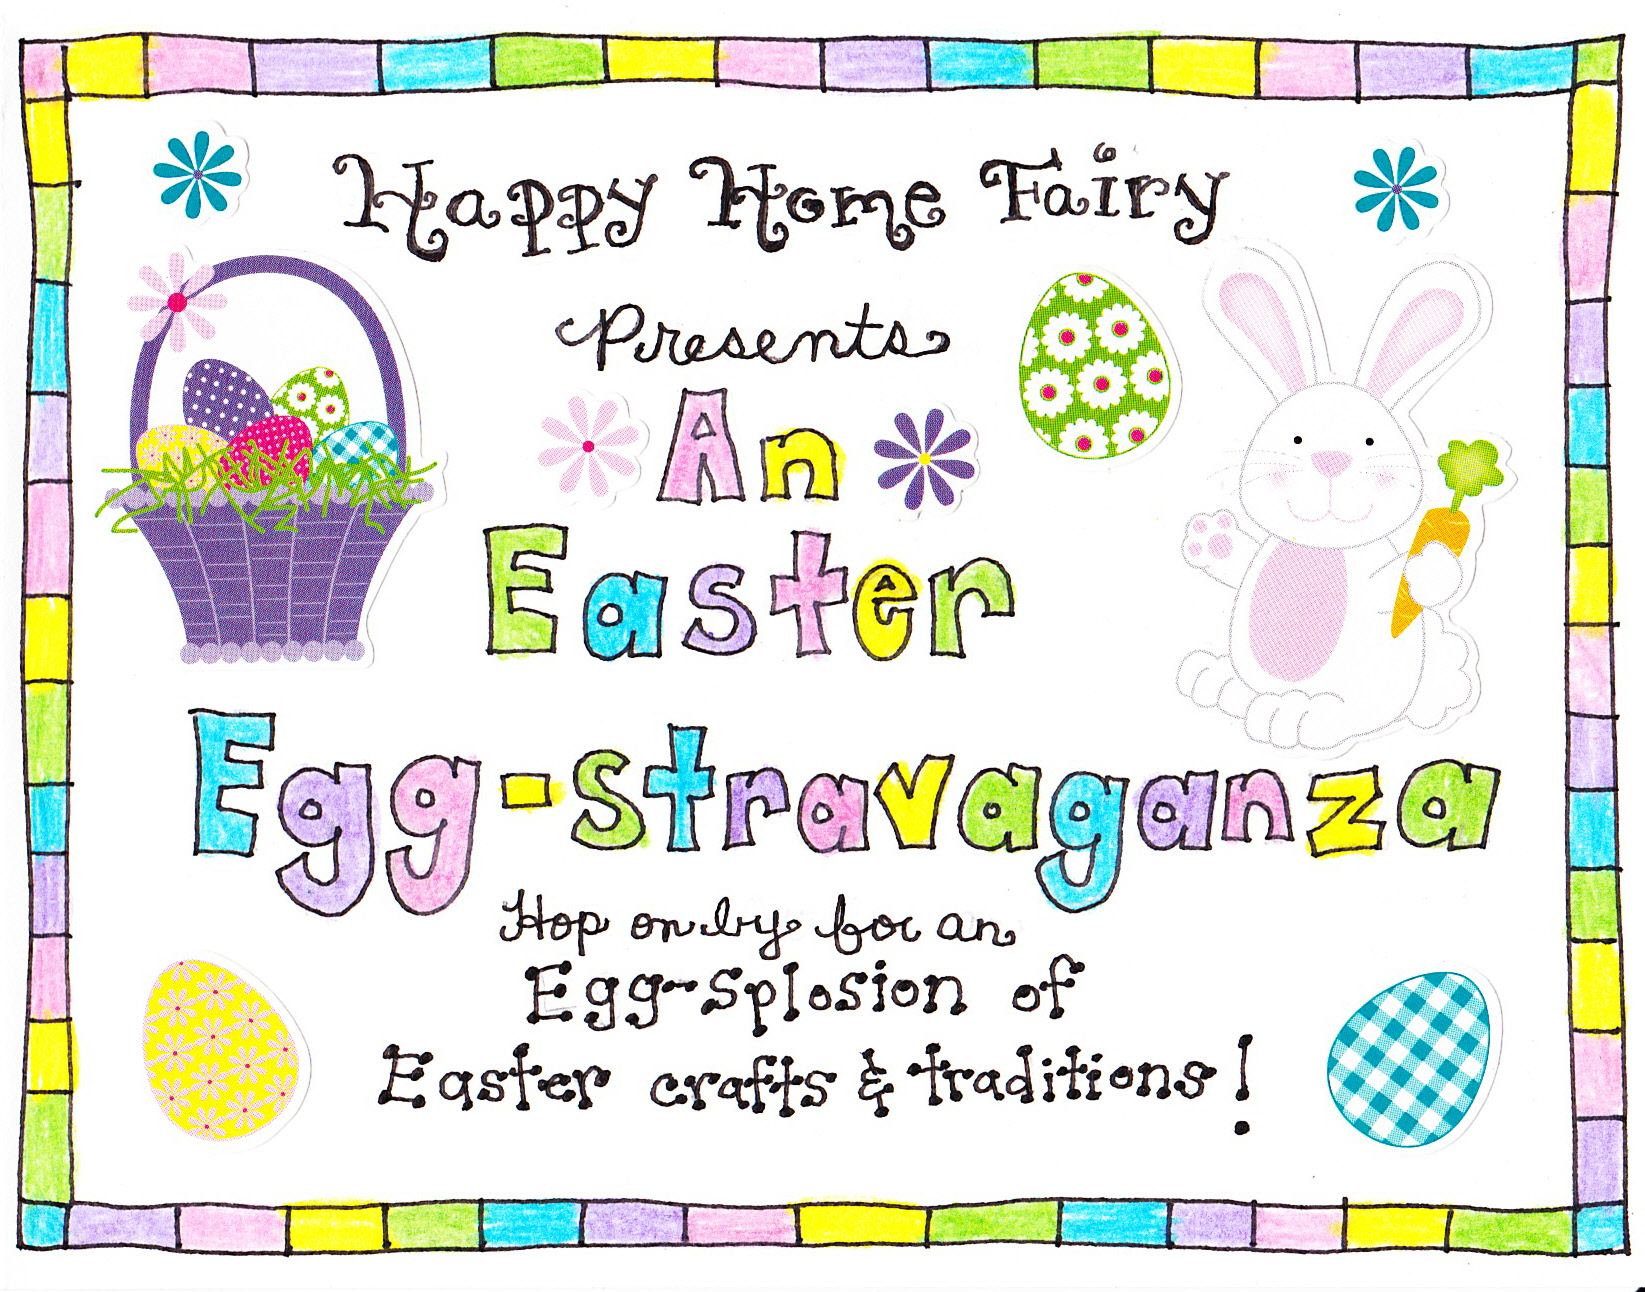 You've Been Egged!! - An Easter Tradition - Happy Home Fairy